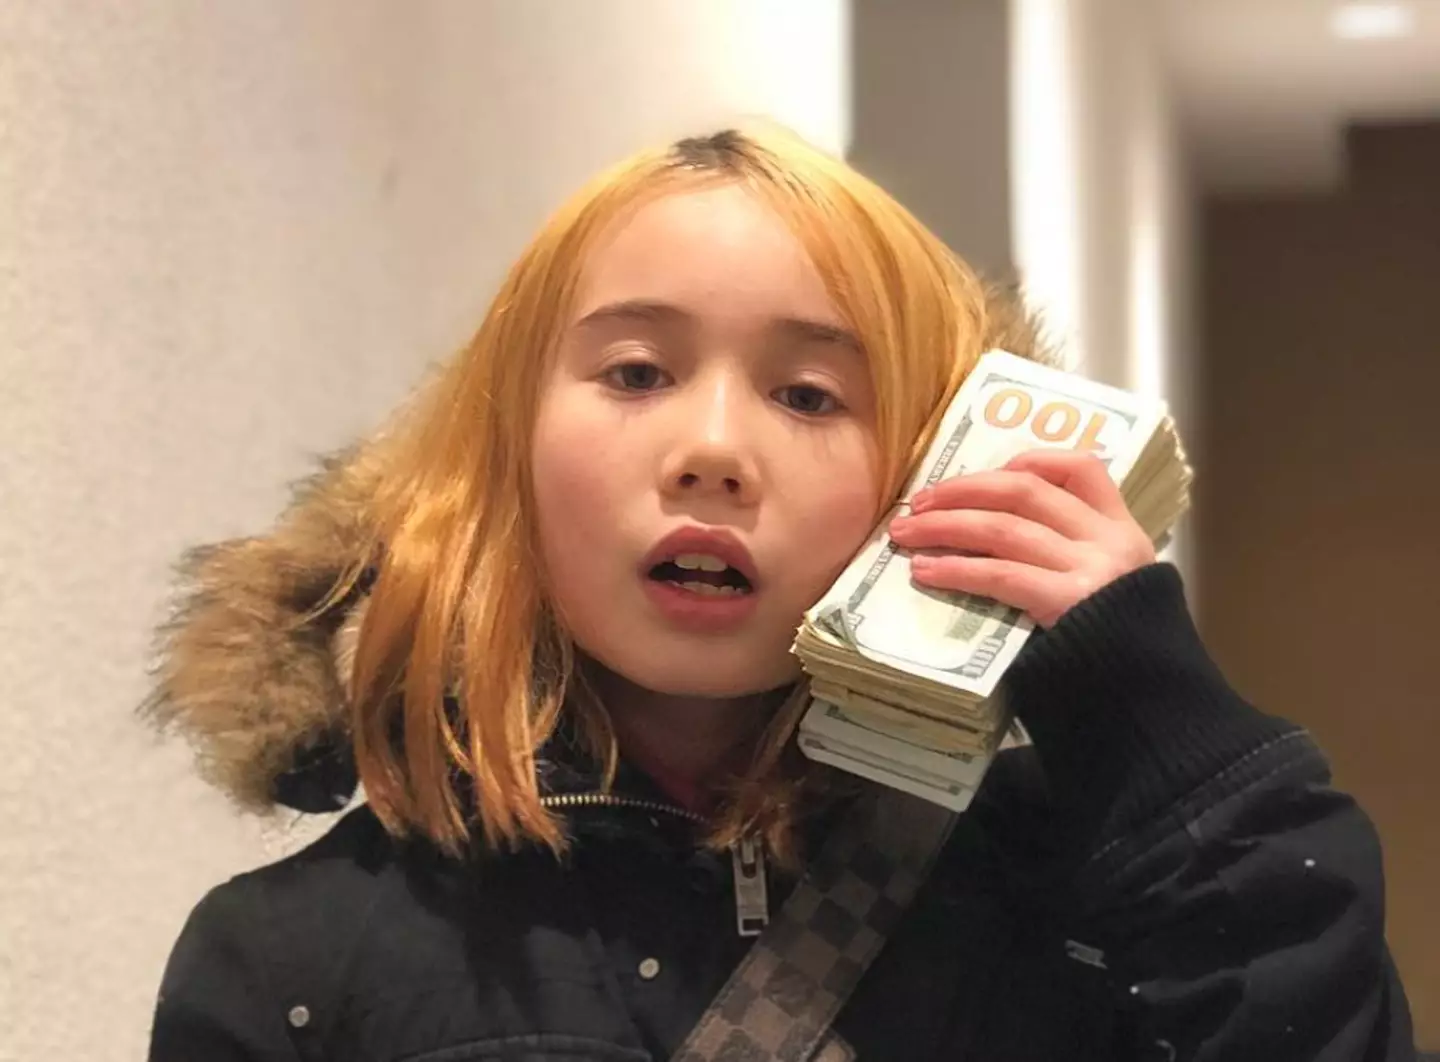 News of Lil Tay's death was announced on her Instagram.